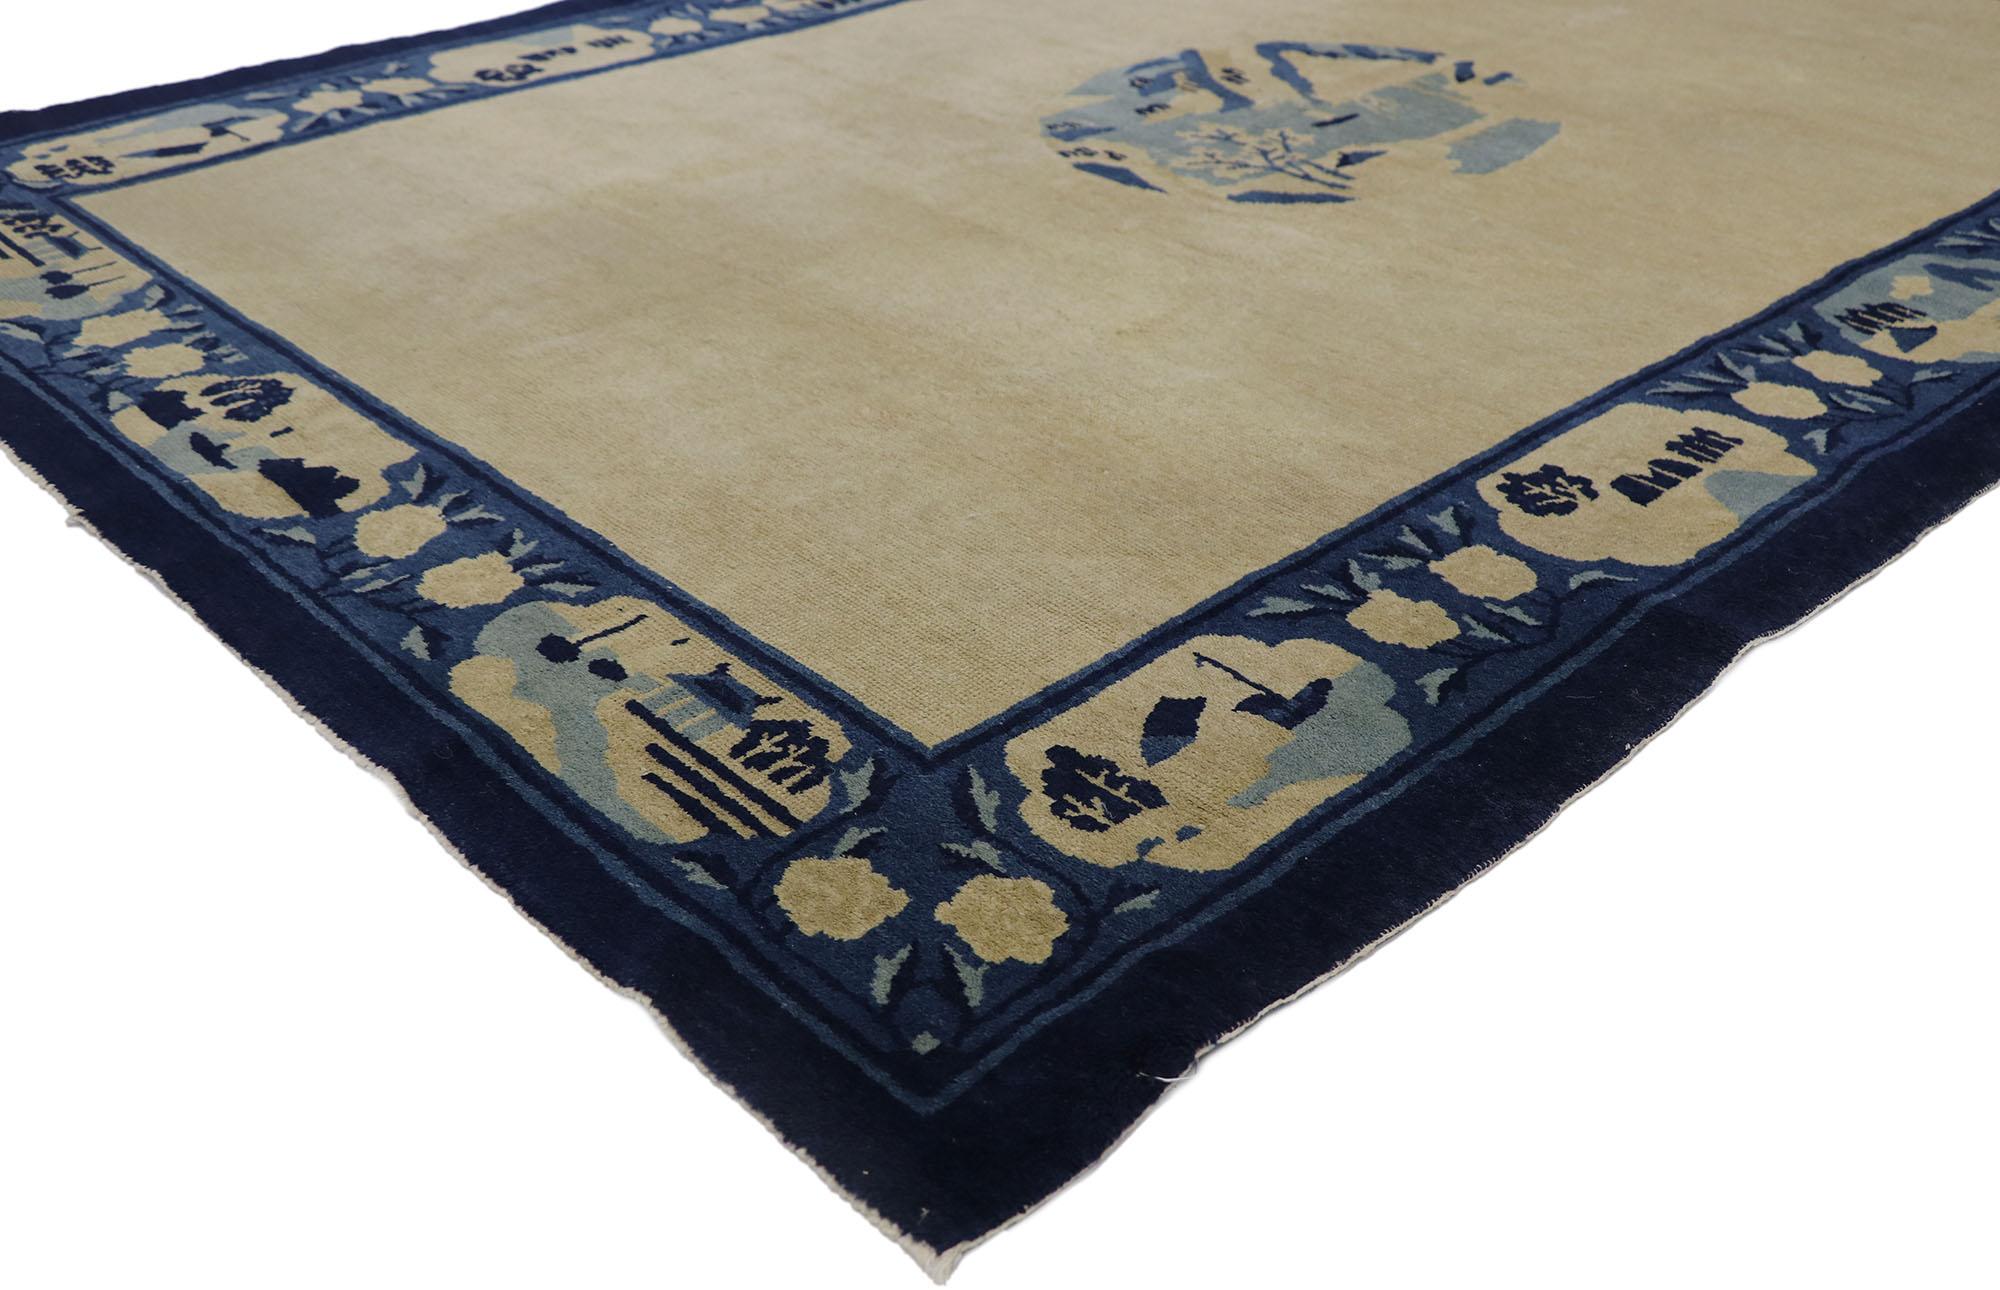 78124 Distressed Antique Chinese Peking Pictorial Rug with Cartouche Border 05'02 x 07'07. With its effortless beauty and rustic sensibility, this hand-knotted wool antique Chinese Peking rug will take on a curated lived-in look that feels timeless